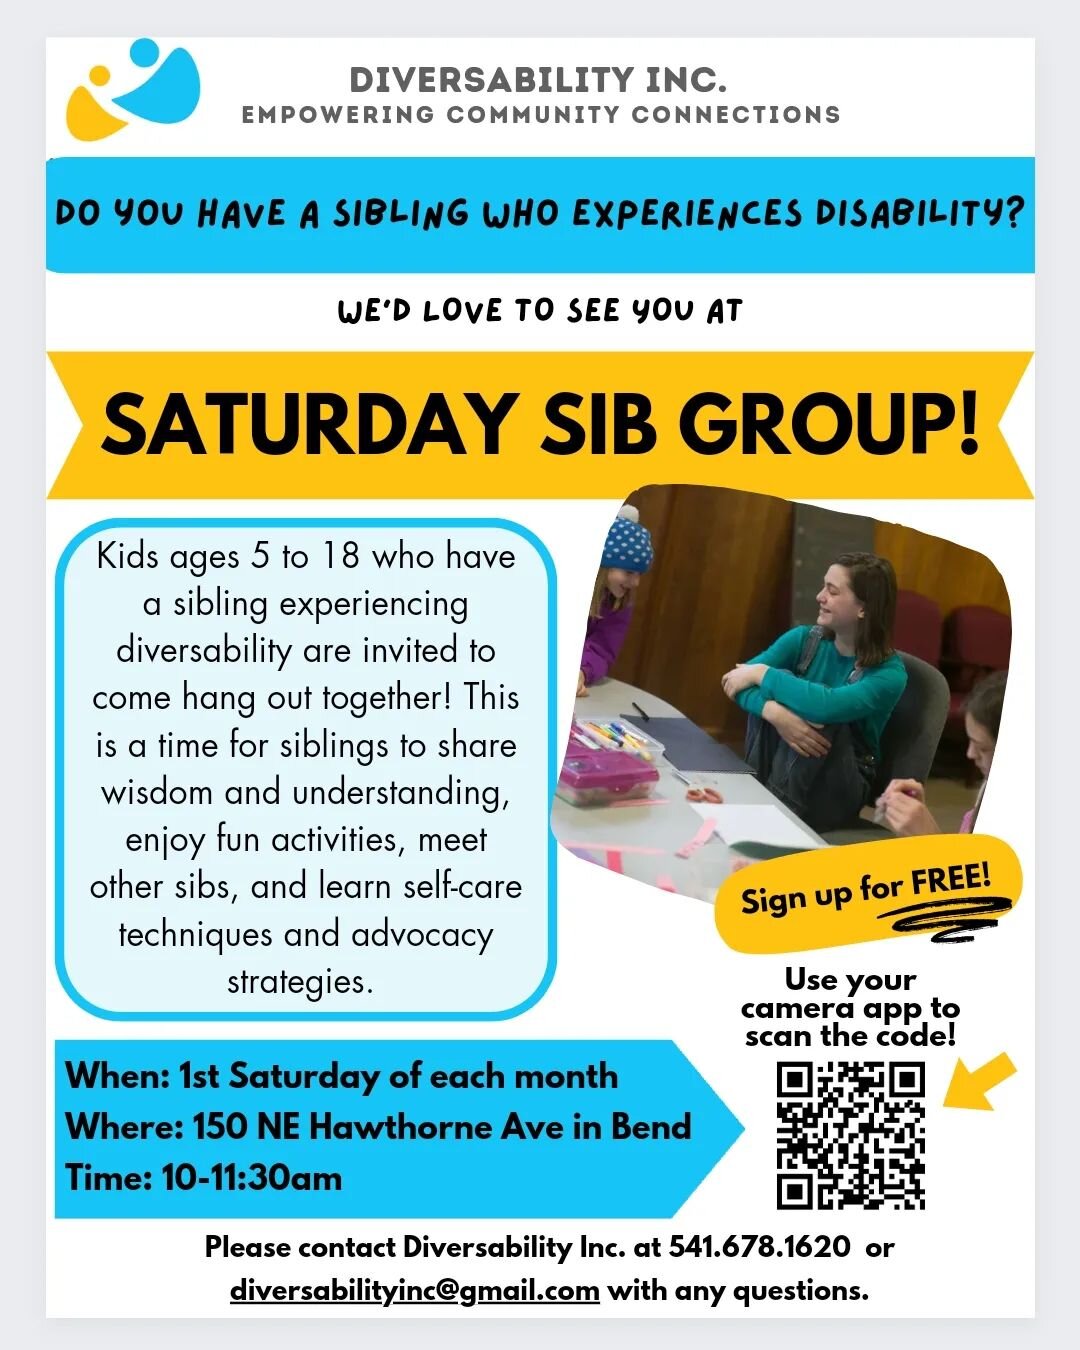 Tomorrow is our monthly Saturday Sib Group!

Please share with anyone you think may be interested!